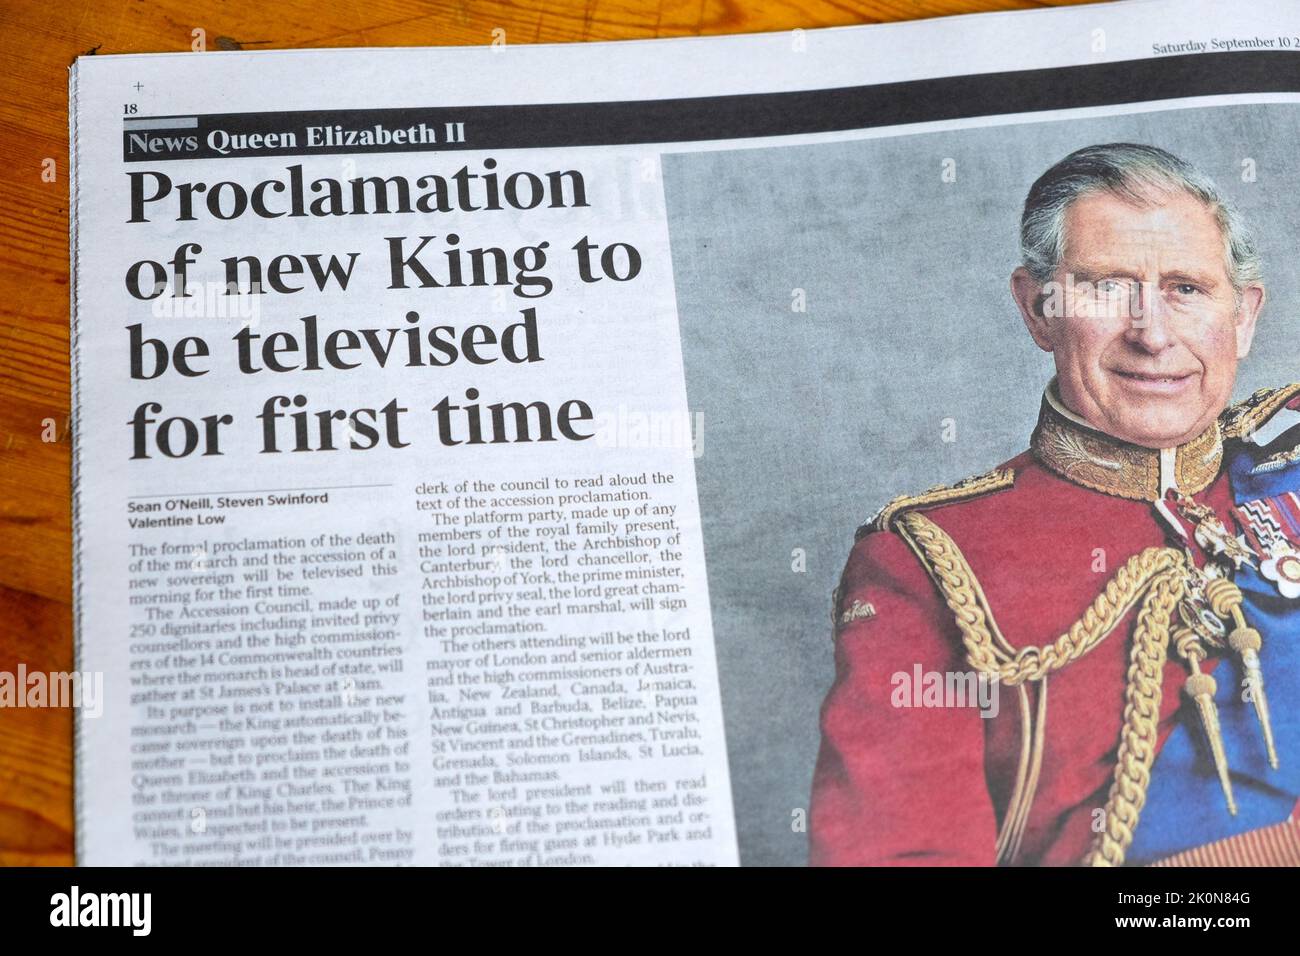 'Proclamation of new King to be televised for first time' The Times newspaper headline article clipping King Charles III 10 September 2022 London UK Stock Photo